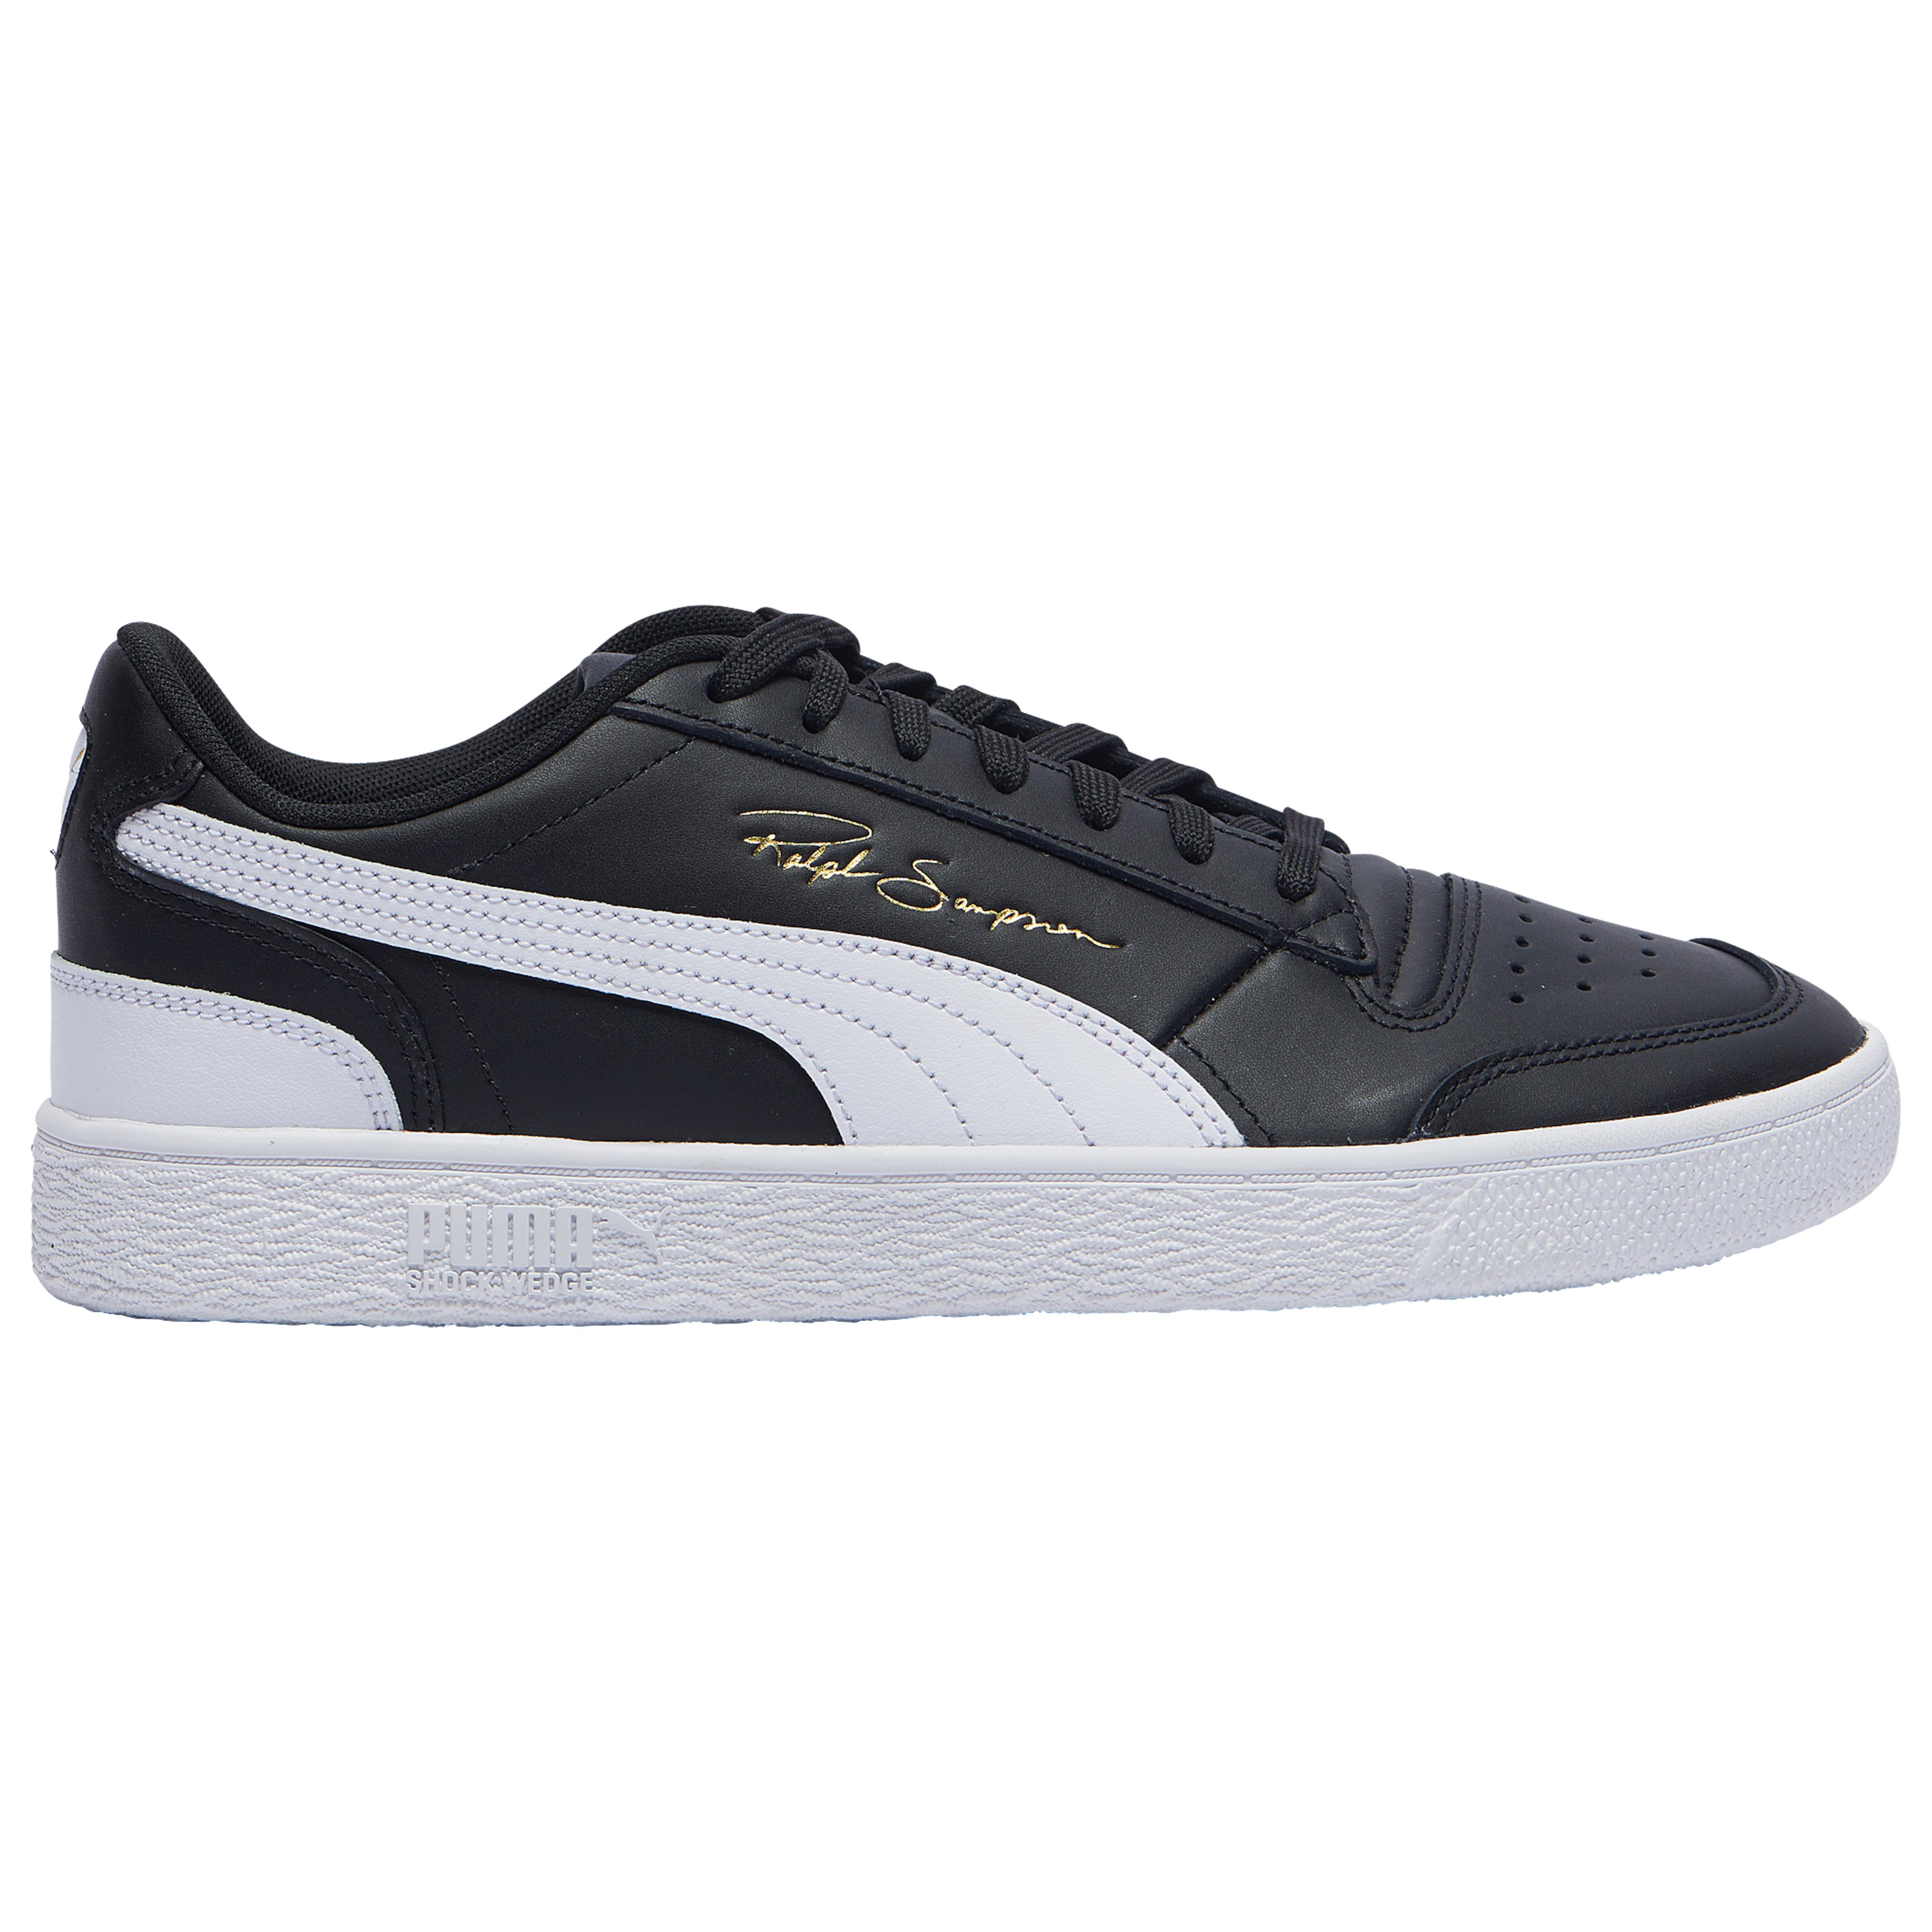 PUMA Leather Ralph Sampson Lo Basketball Shoes in Black/White/White ...